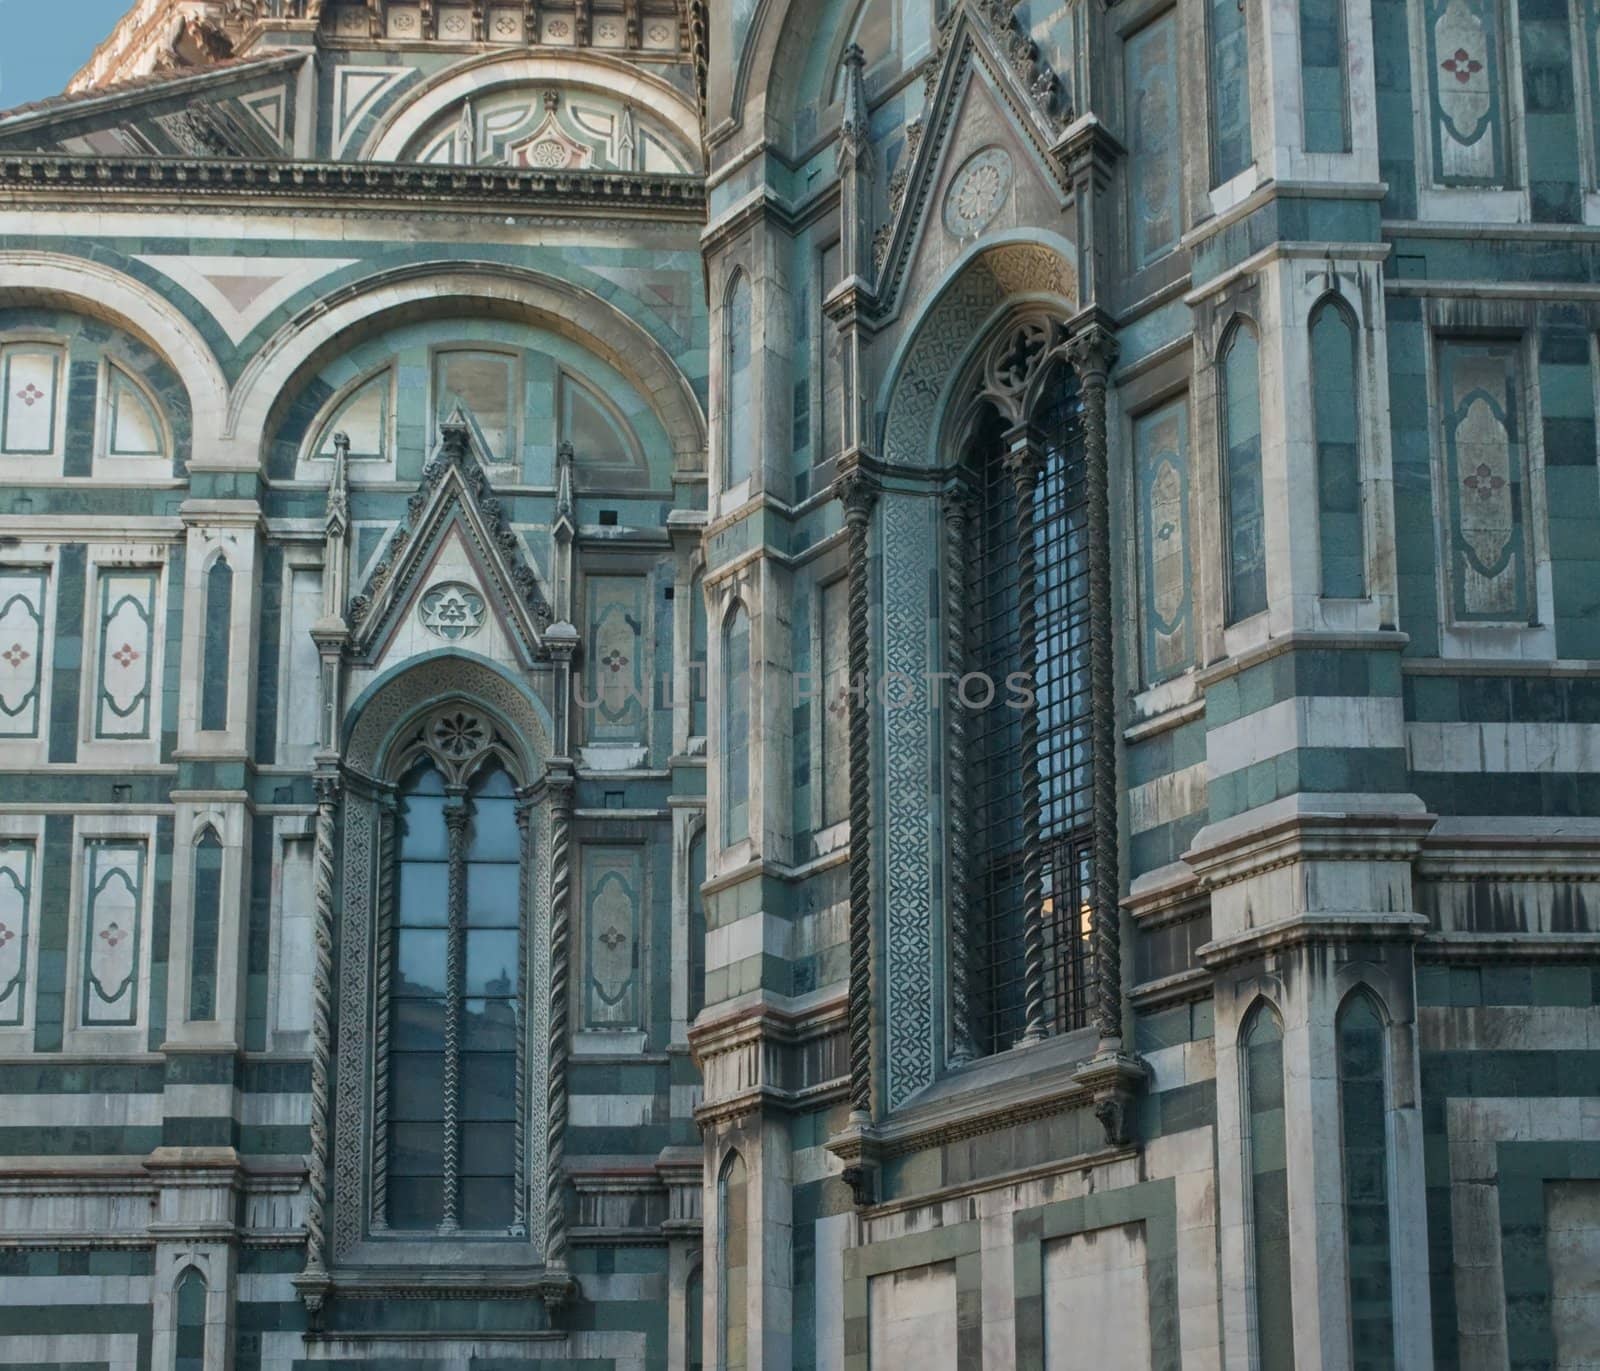 Decor  of Duomo Cathedral by glassbear